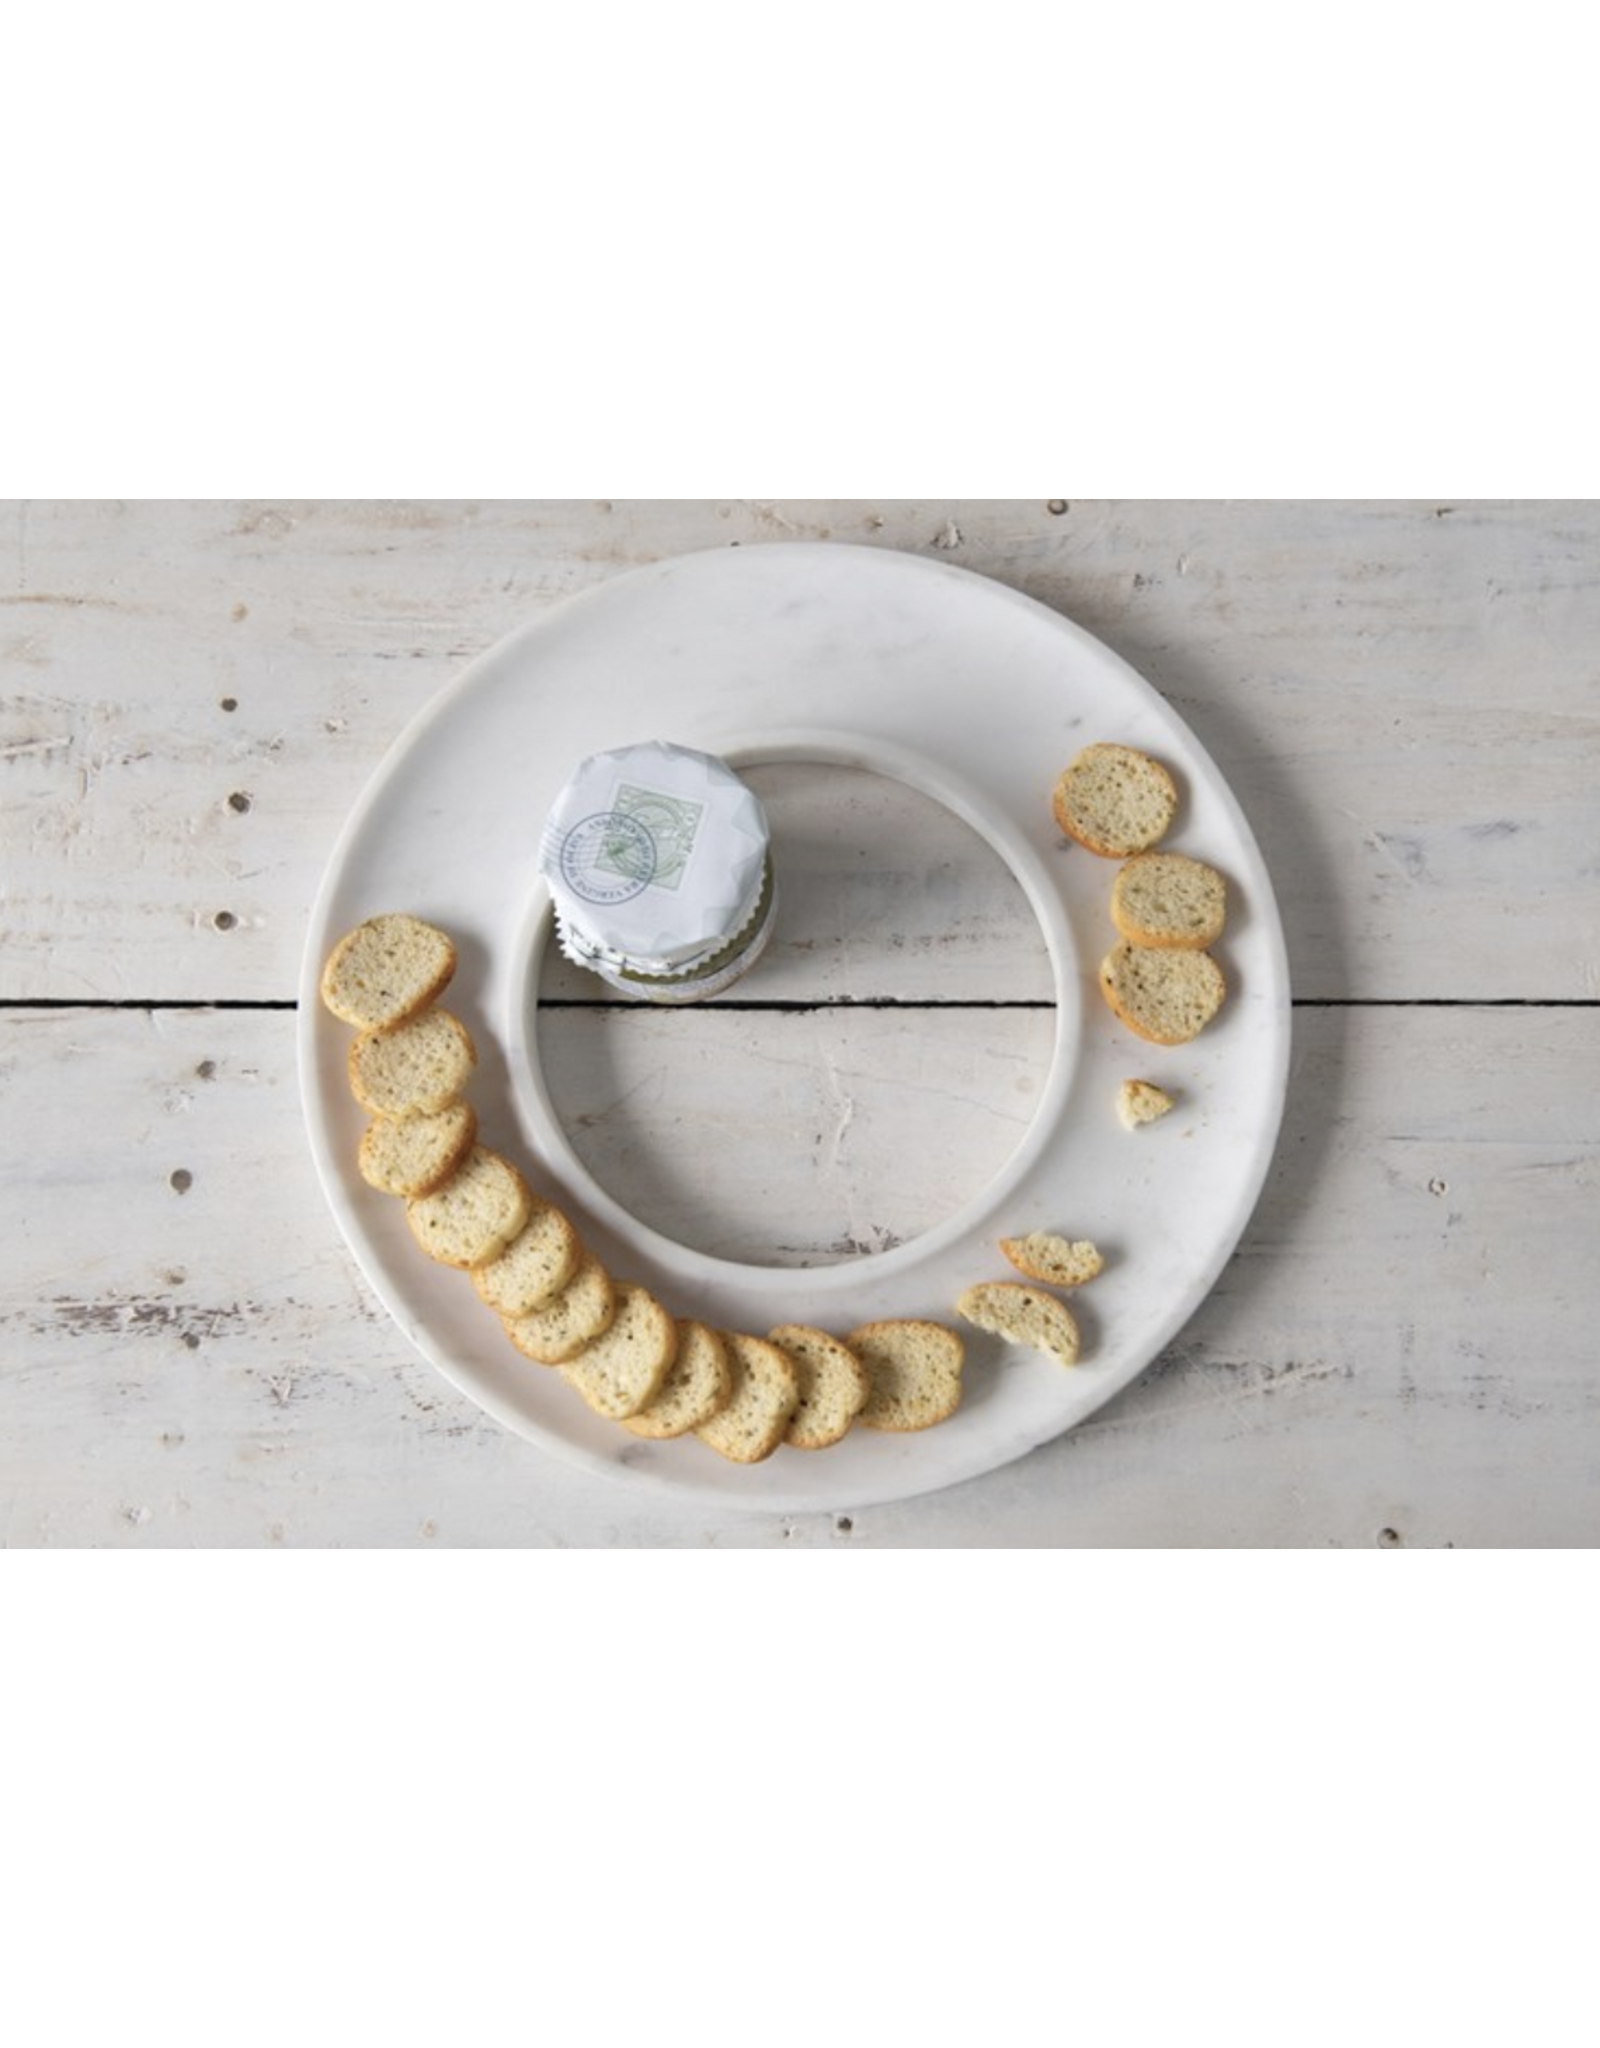 Creative Co-Op 13" Round Marble Circle Cracker Cheese Tray